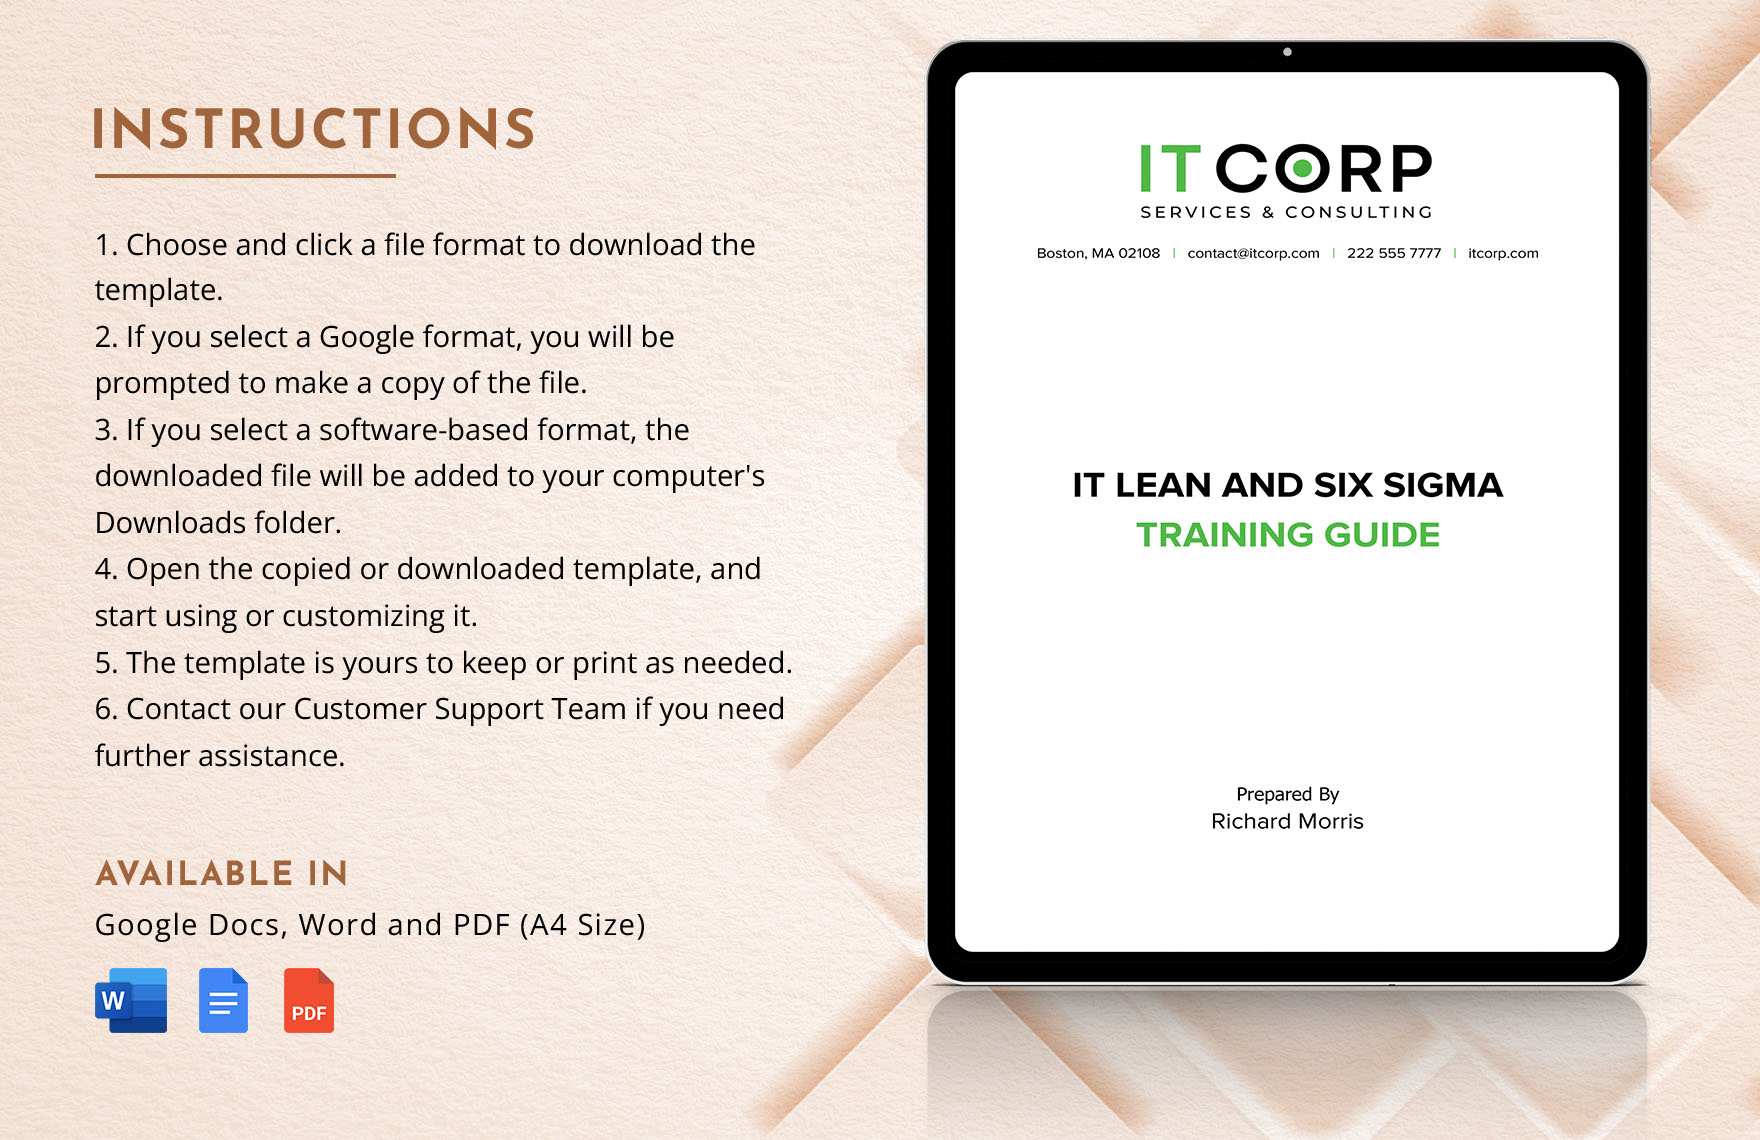 IT Lean and Six Sigma Training Guide Template